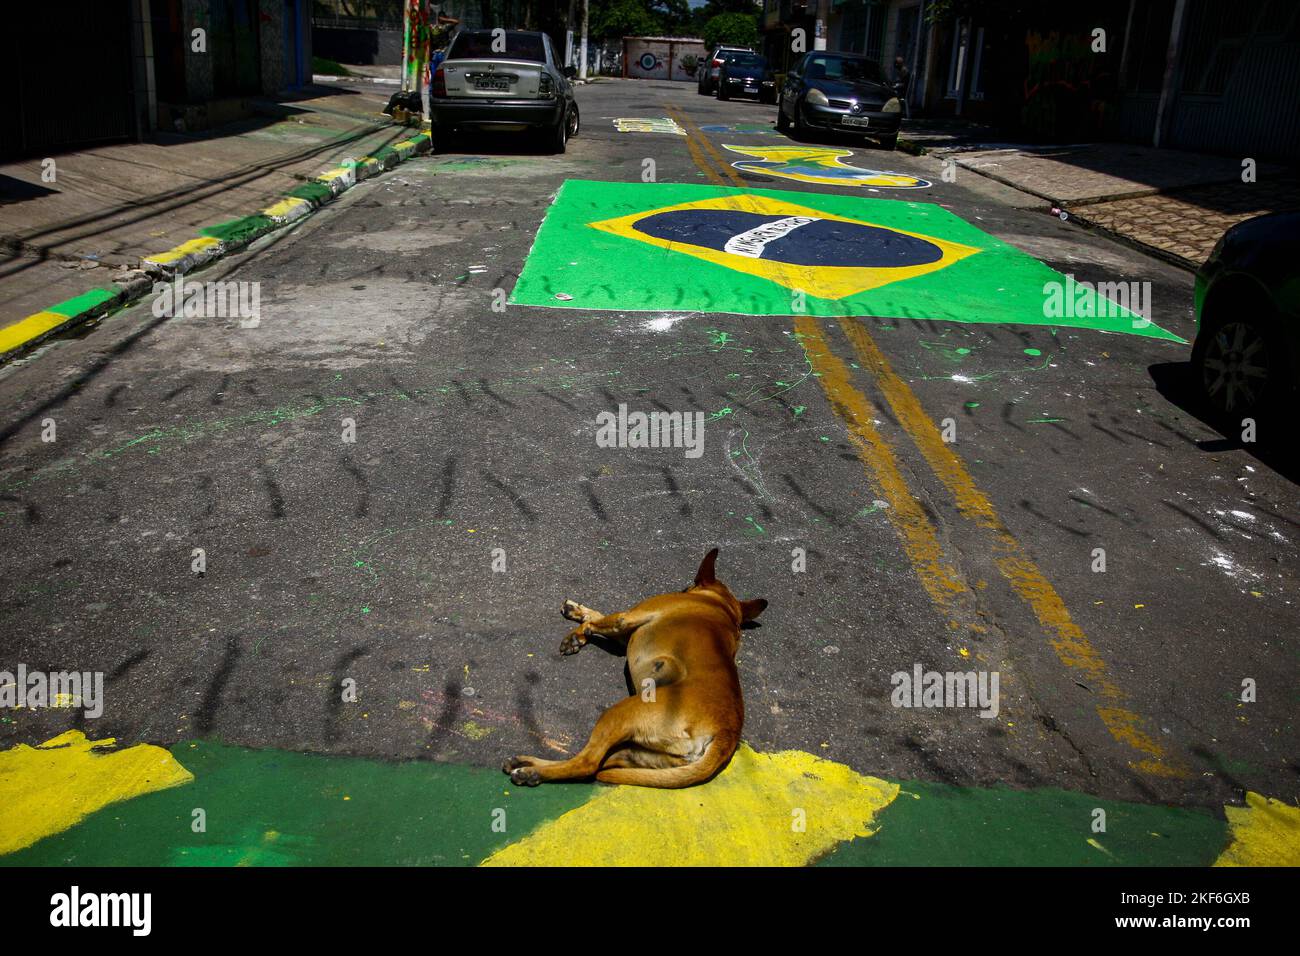 OSASCO, SP - 16.11.2022: CLIMA DE COPA DO MUNDO - Streets are painted with the colors of the Brazilian flag, in support of the Brazilian soccer team that is playing in the World Cup in Qatar 2022. Photos from the IAPI neighborhood in the city of Osasco in Greater São Paulo, this Wednesday morning (16) . (Photo: Aloisio Mauricio/Fotoarena) Stock Photo